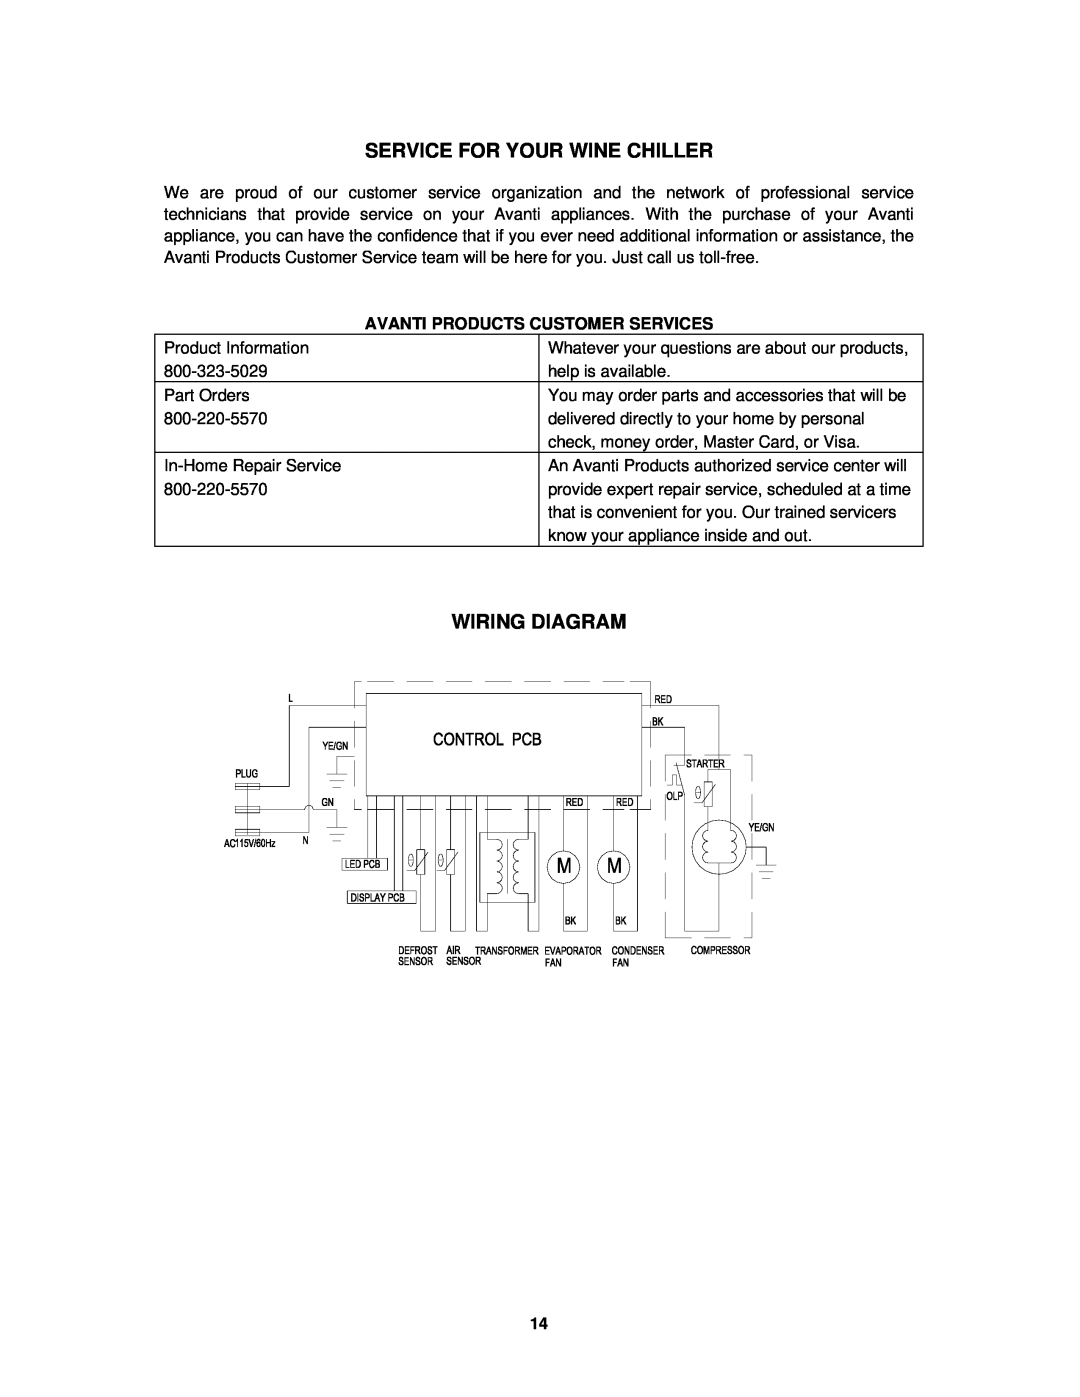 Avanti WC4800C instruction manual Service For Your Wine Chiller, Wiring Diagram, Avanti Products Customer Services 